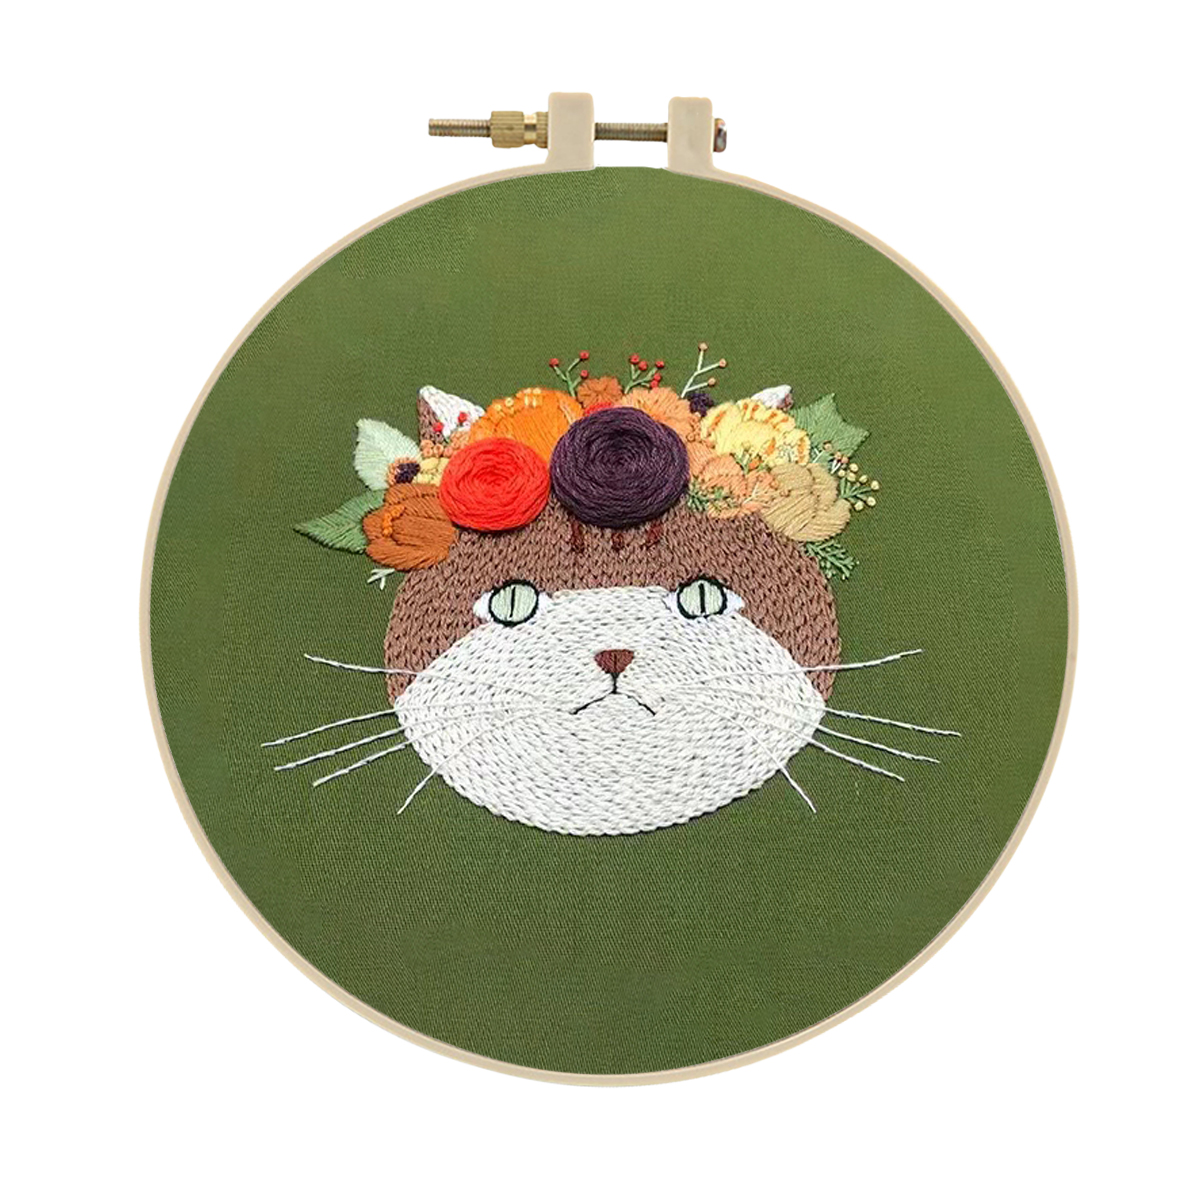 Embroidery starter kit for Adult Beginner - Cute Cat Pattern